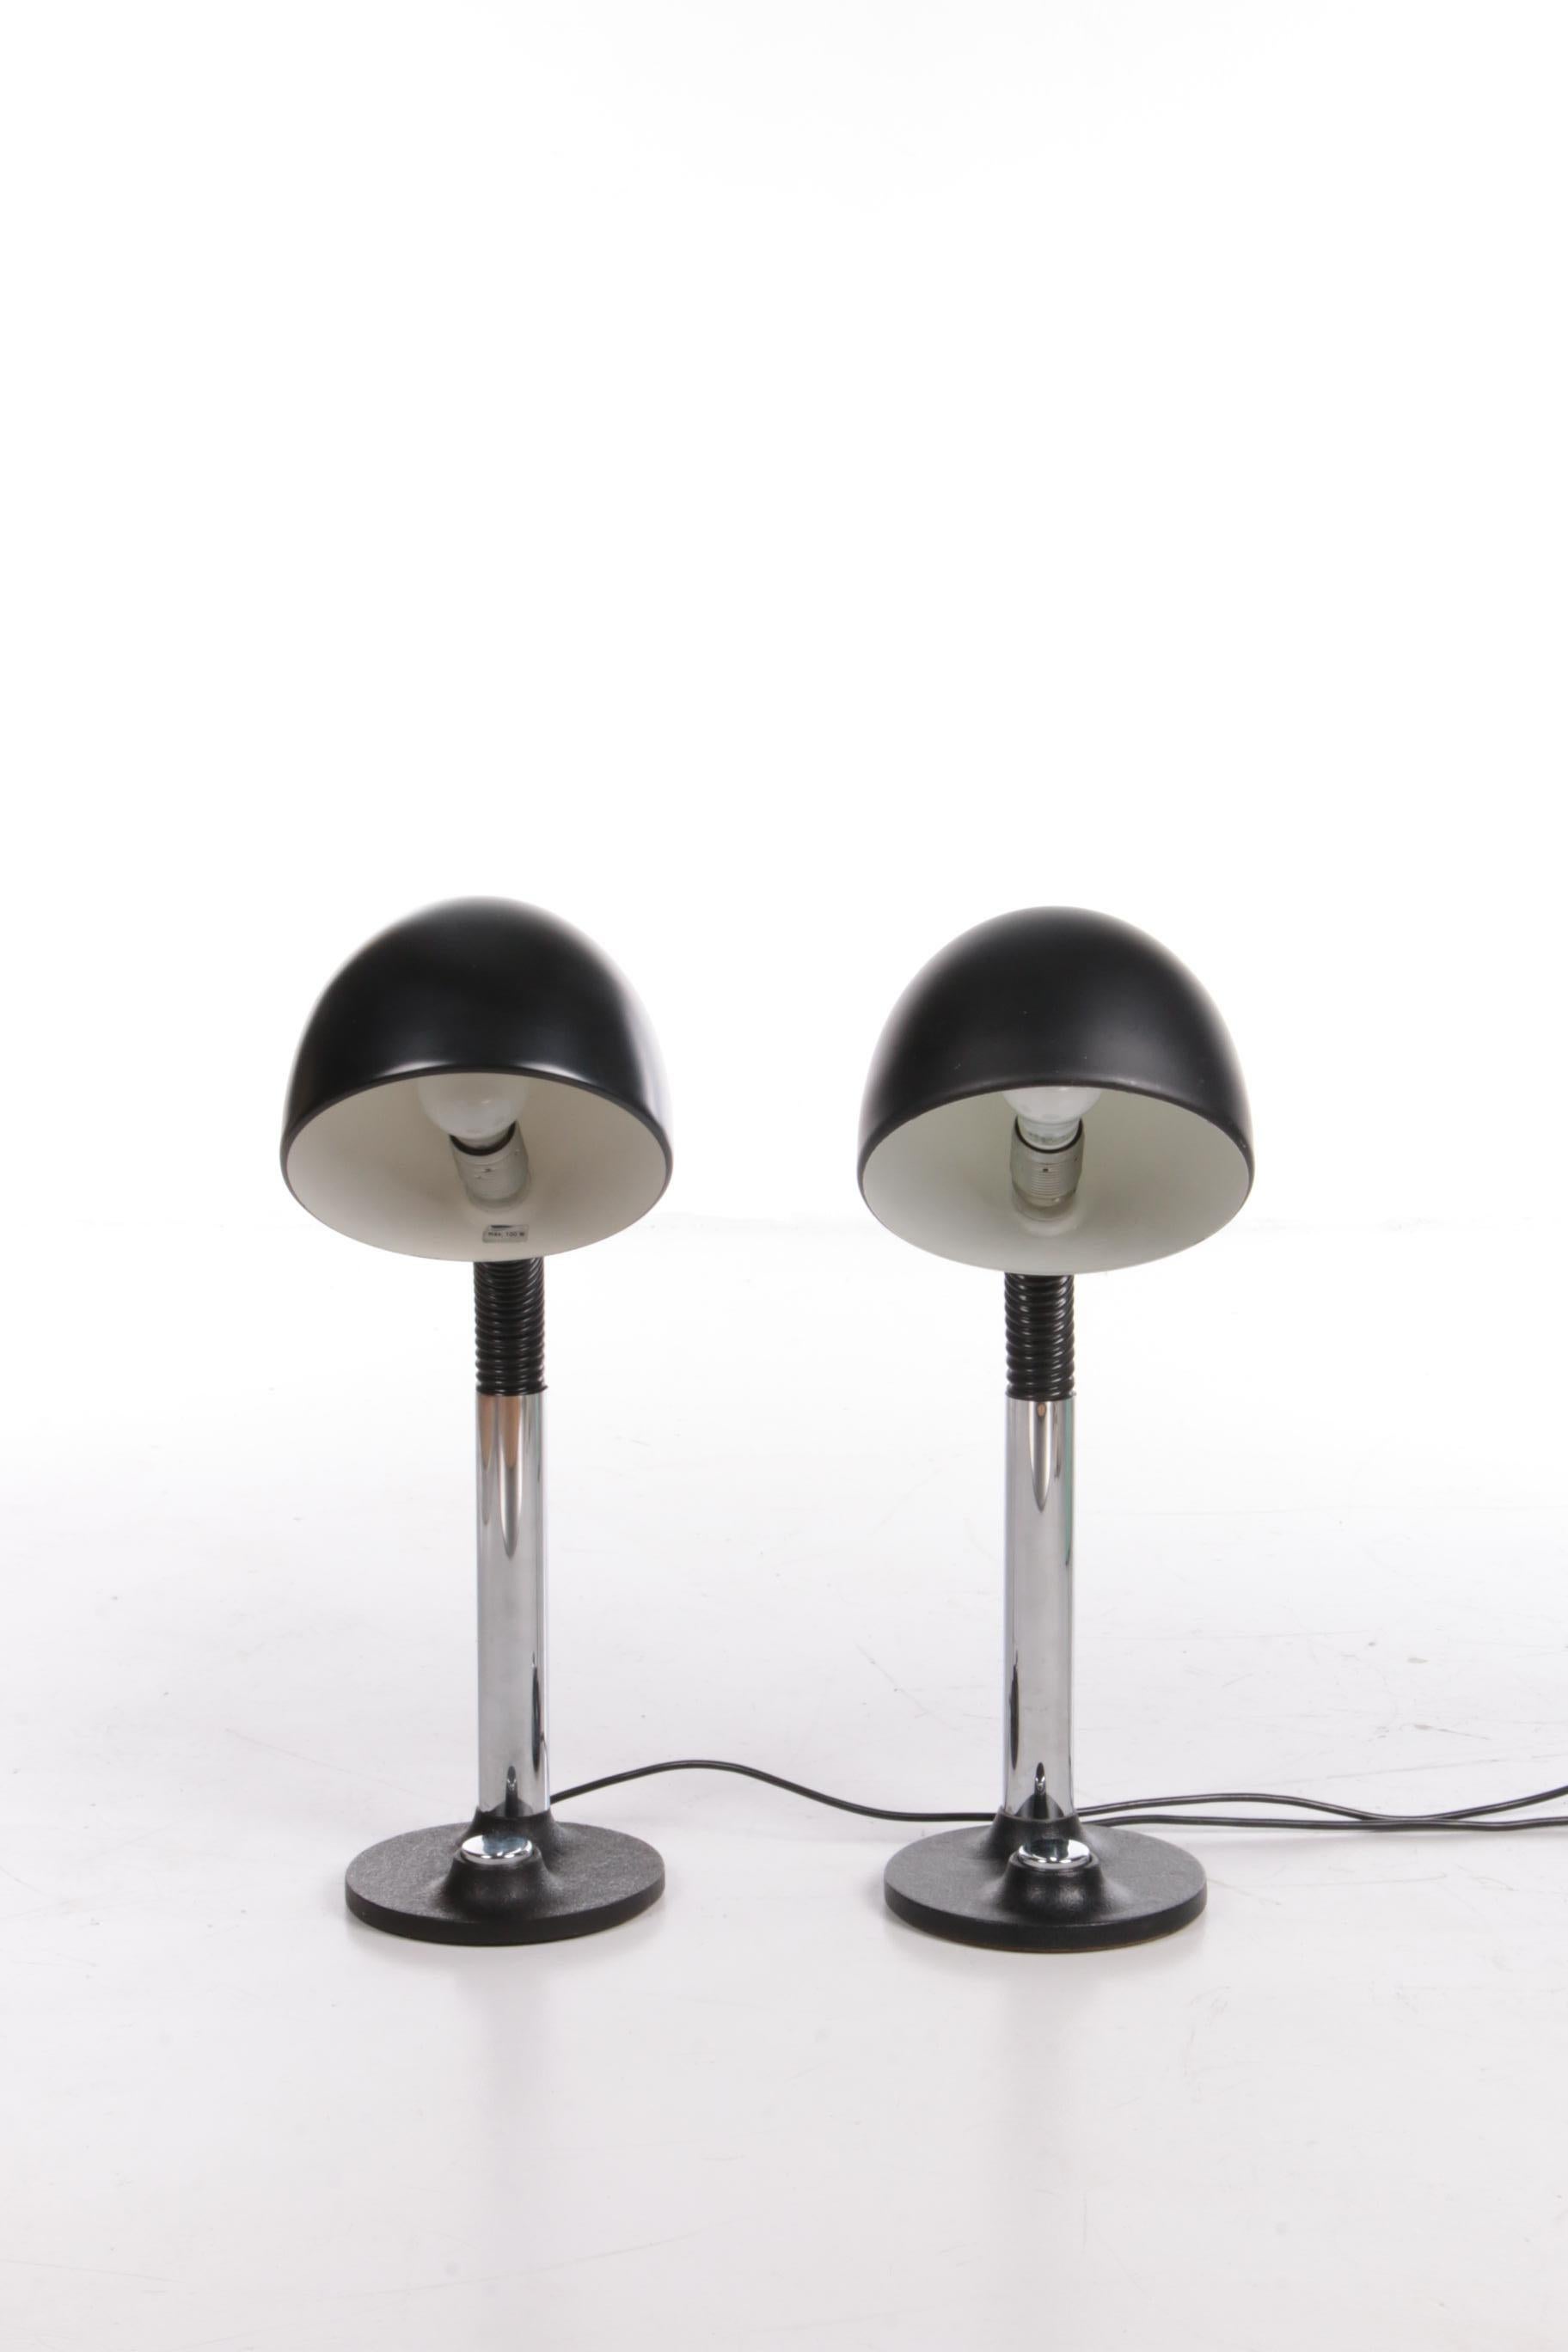 A set of two large desk lamps (model 7404), made in the 1970s by Hillebrand, Germany. Both lamps are in very good vintage condition.

This model has a black round cast iron base with a built-in large chrome switch. The lamps have a metal gooseneck